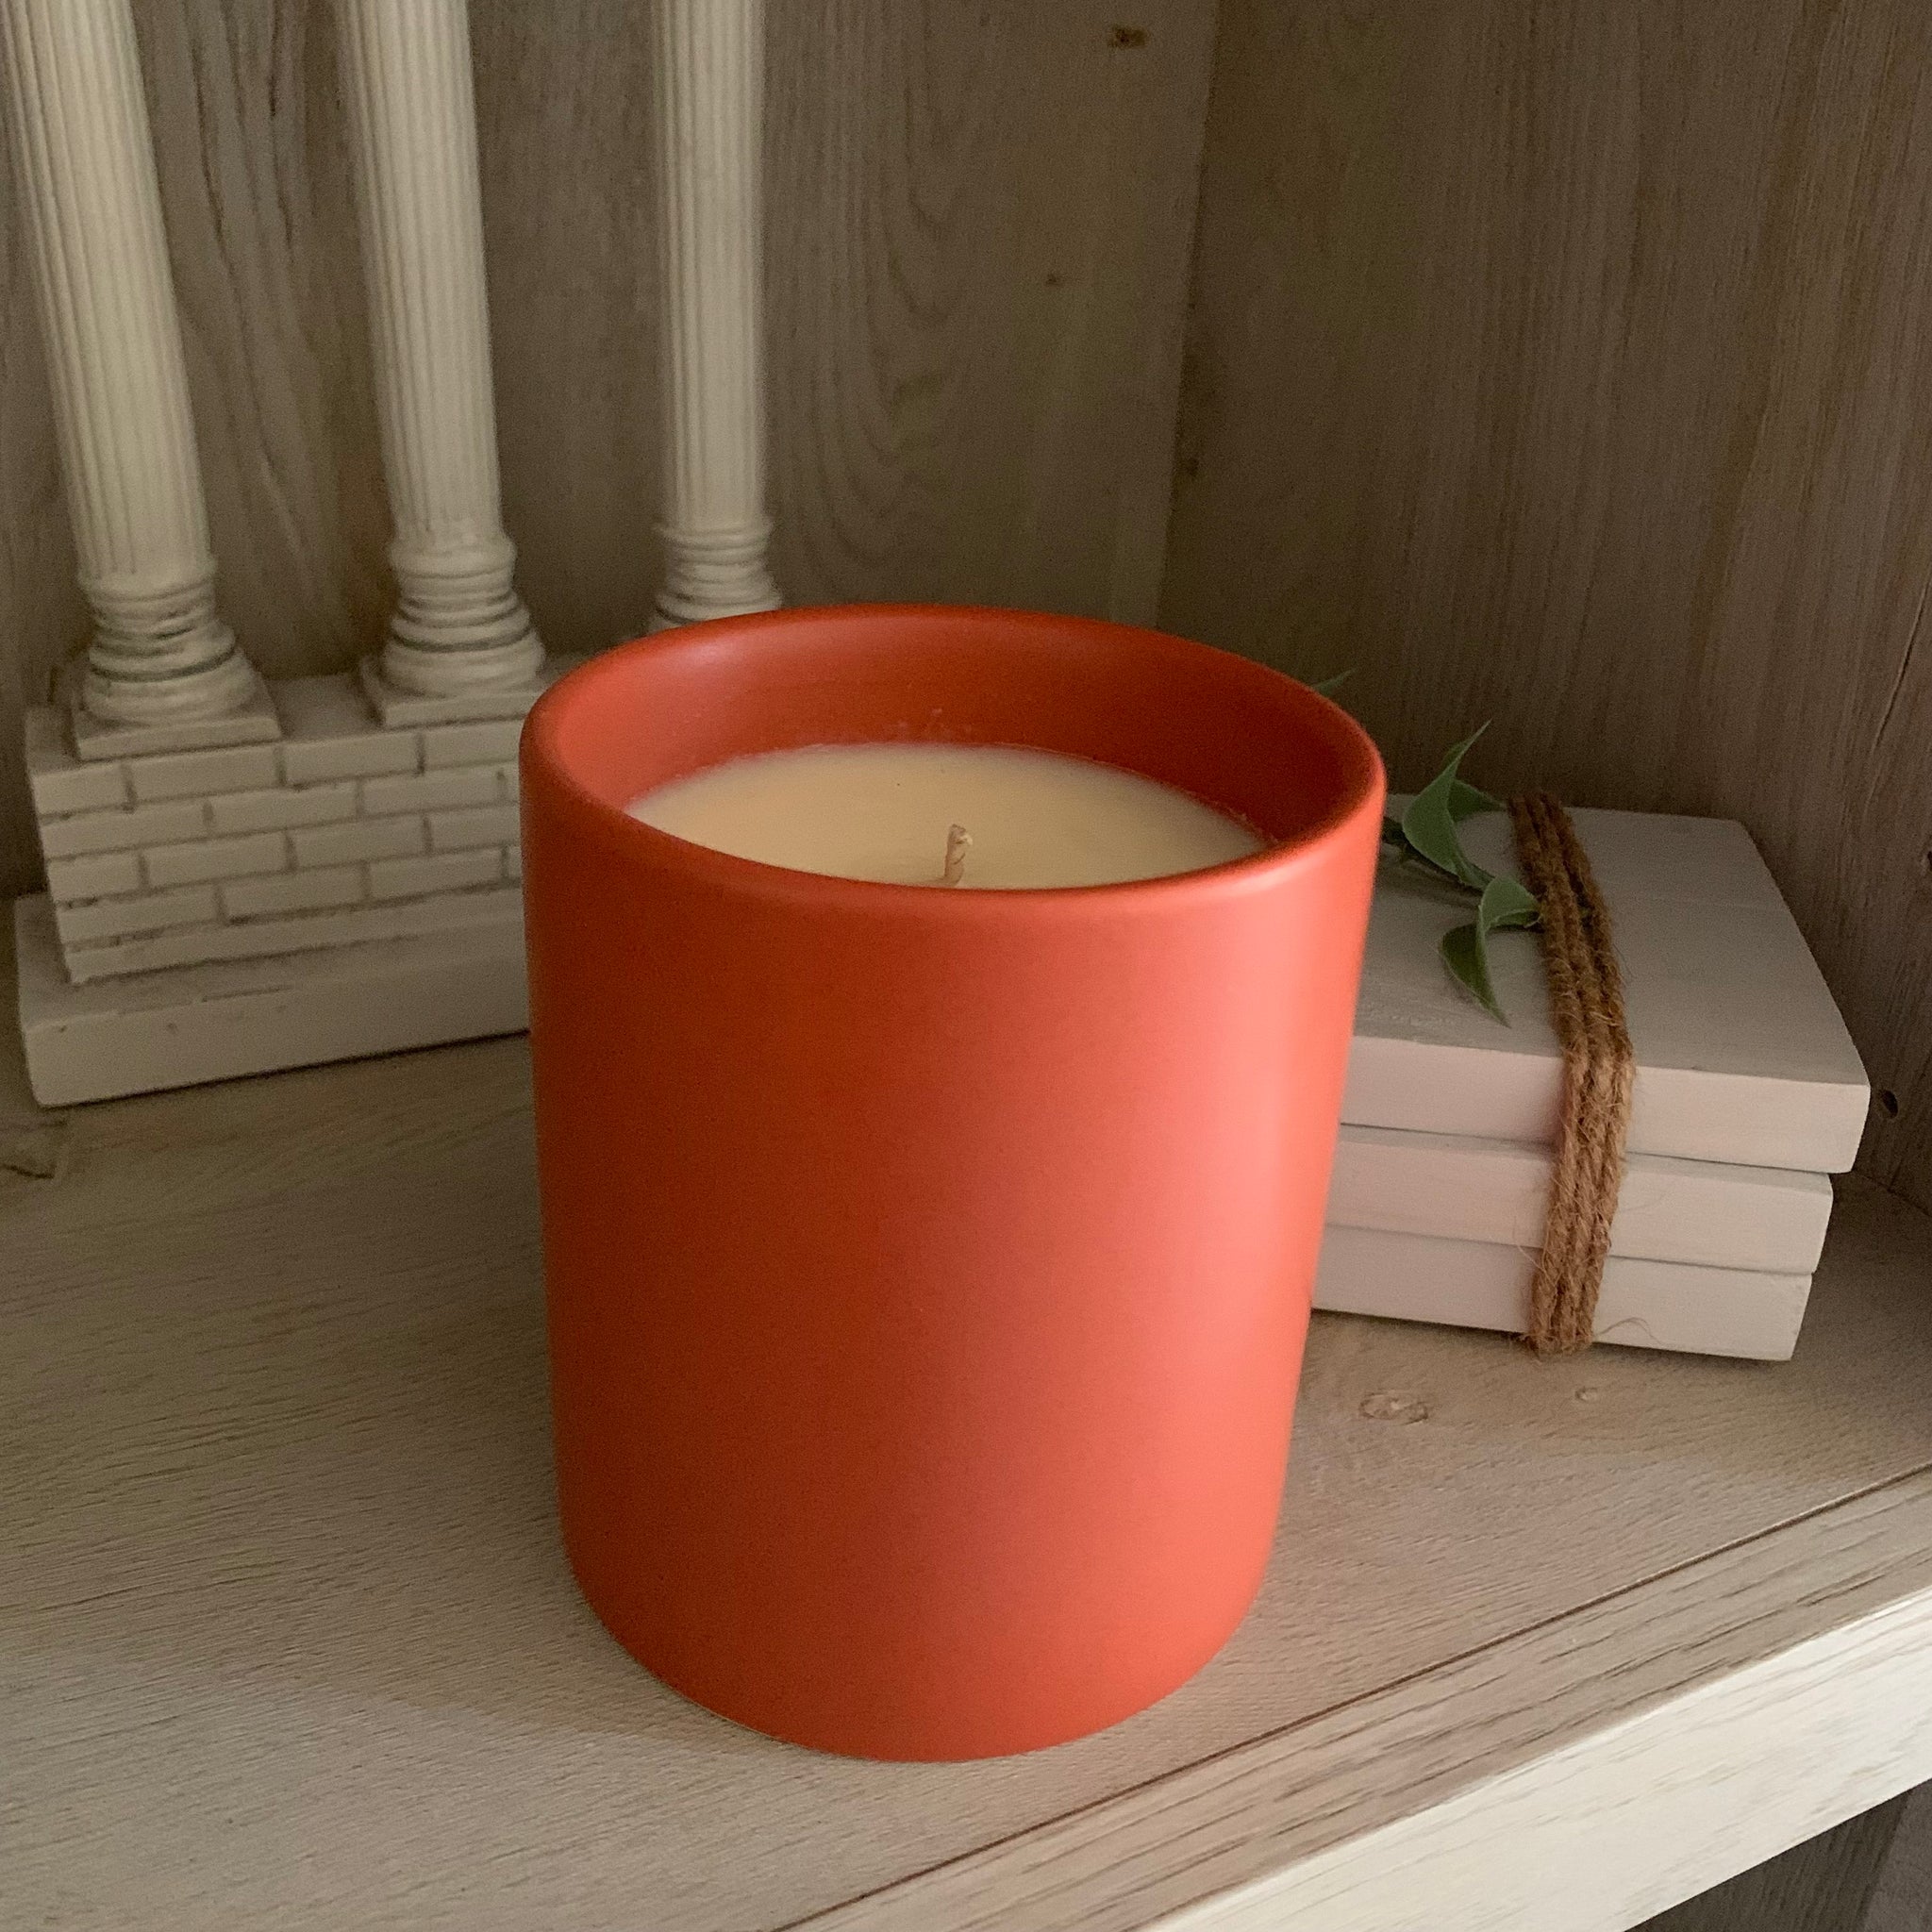 CandleScience Burnt Sienna Modern Ceramic Tumbler | Wholesale Ceramic Candle Container 1 PC Box